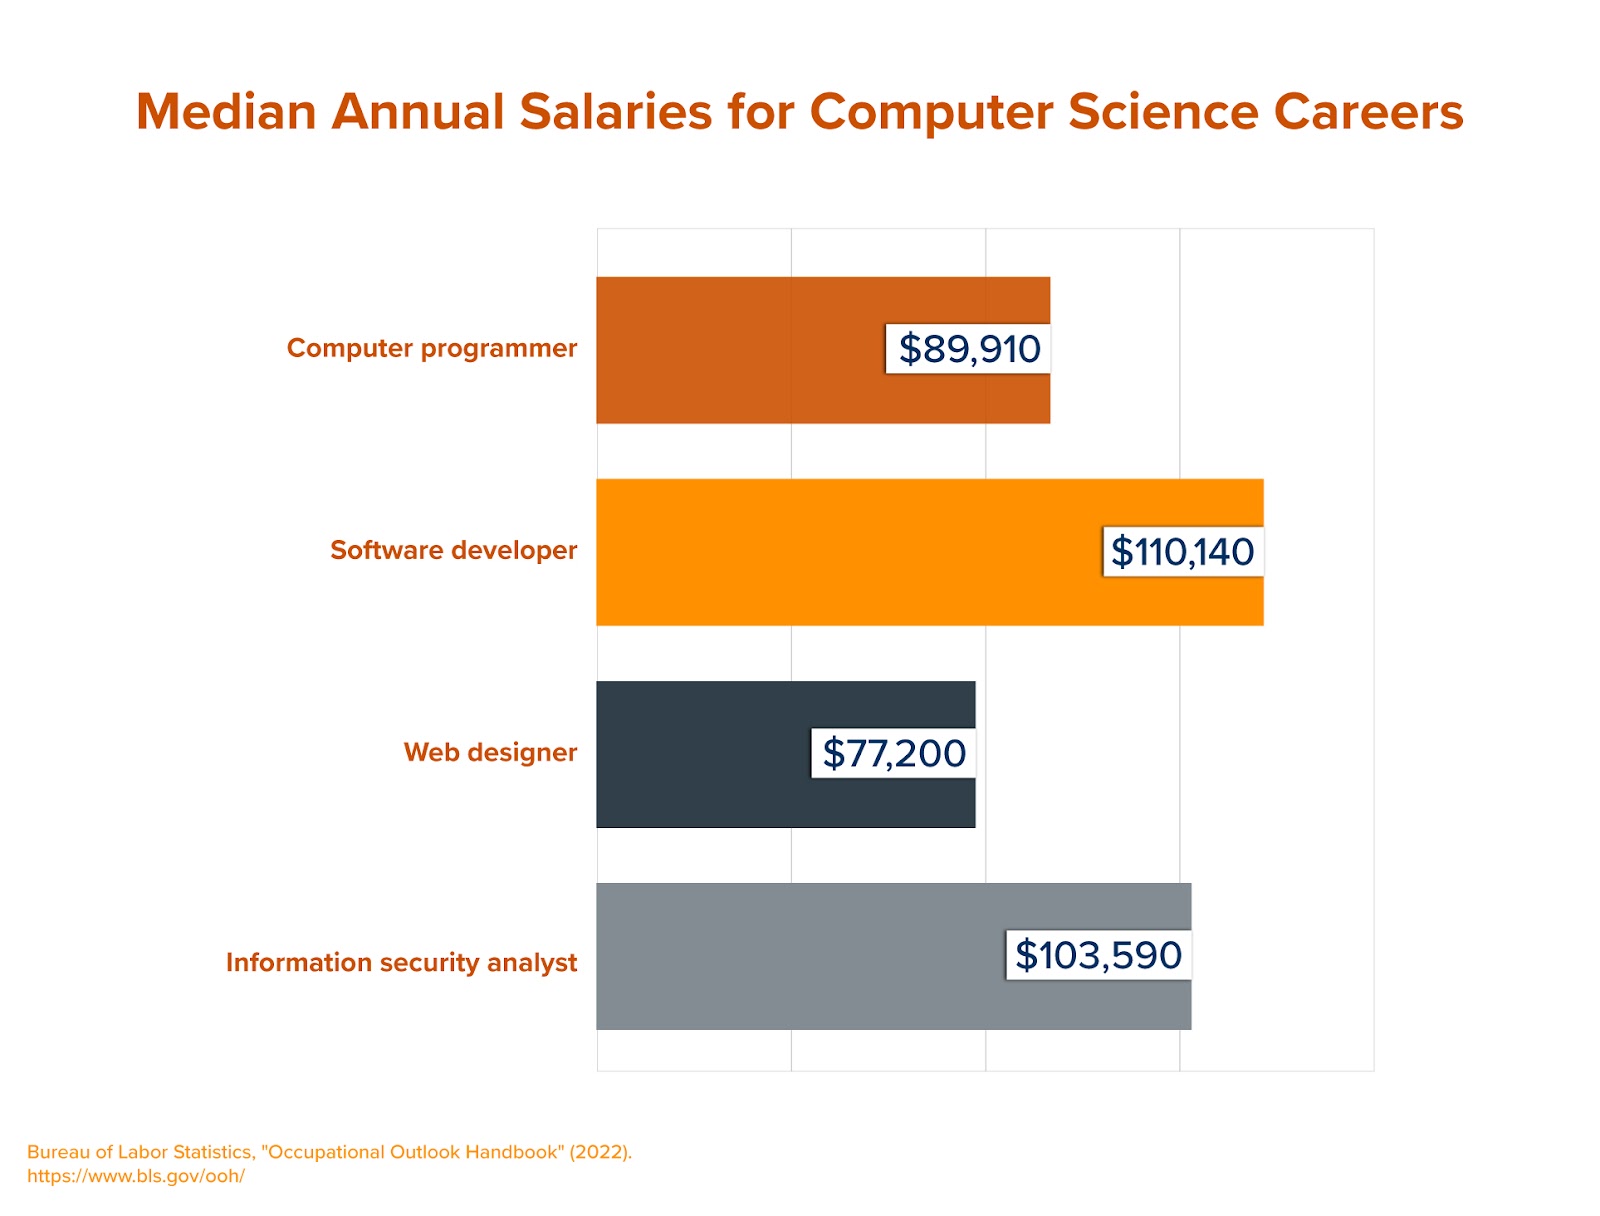 A chart that highlights the median annual salaries for computer science careers.